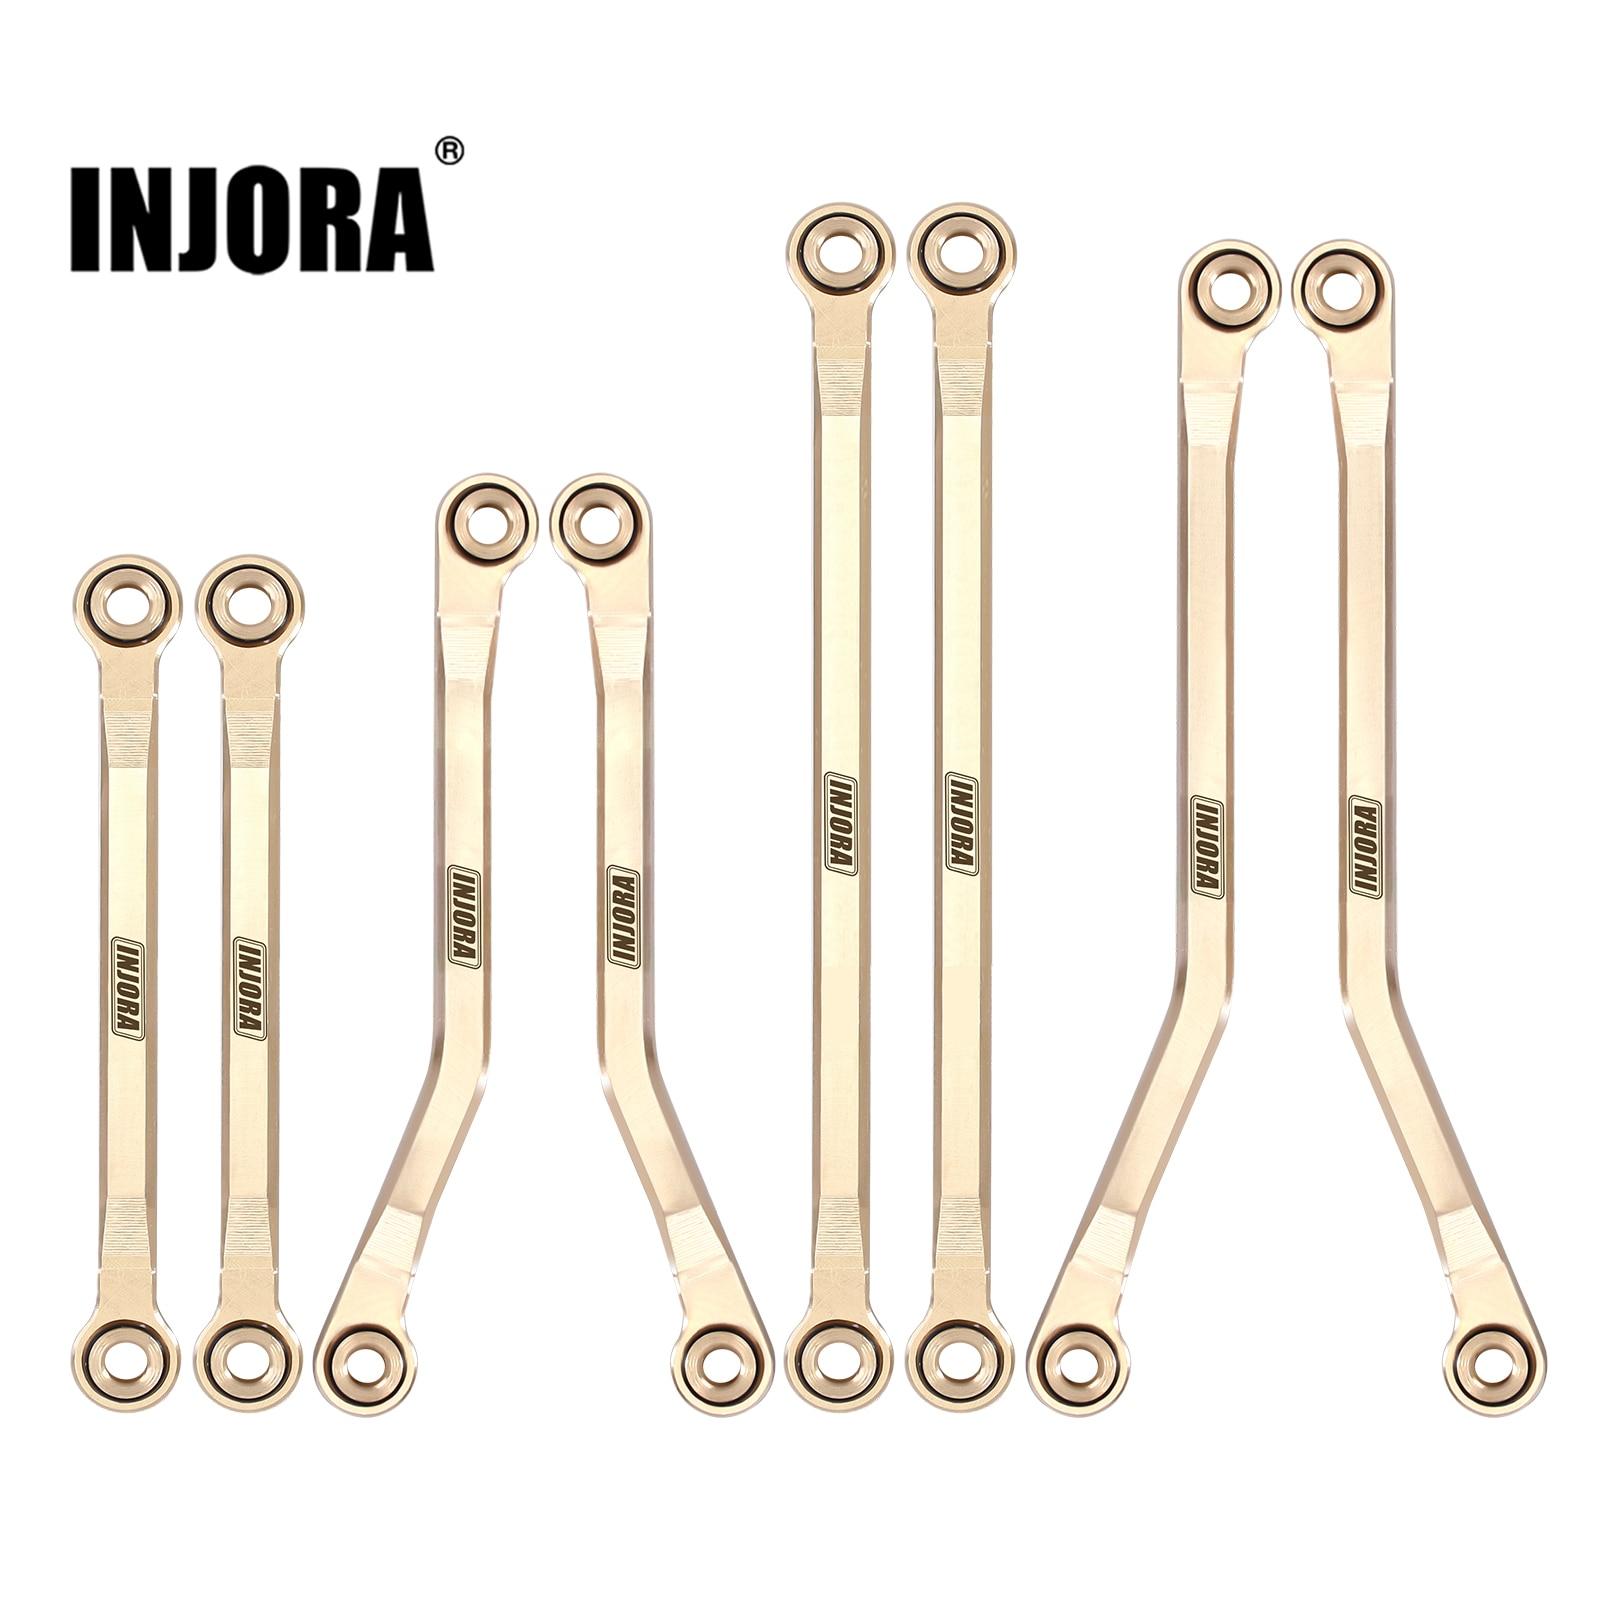 INJORA-42g-Brass-High-Clearance-Chassis-Links-Set-for-1-18-RC-Crawler-TRX4M-Upgrade-Parts.jpg